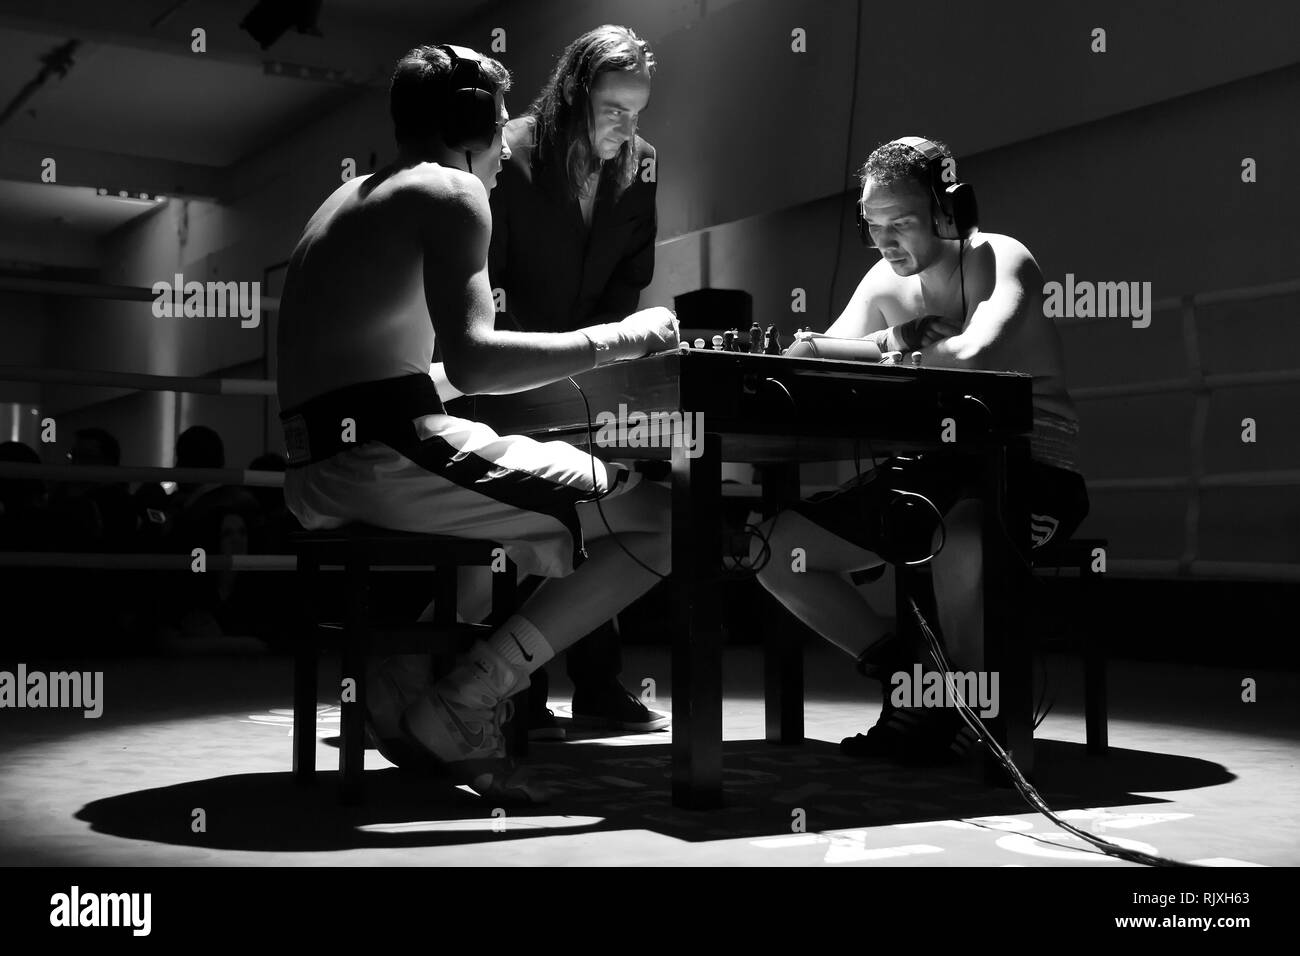 Chessboxing match at the intellectual fight club in Berlin Stock Photo